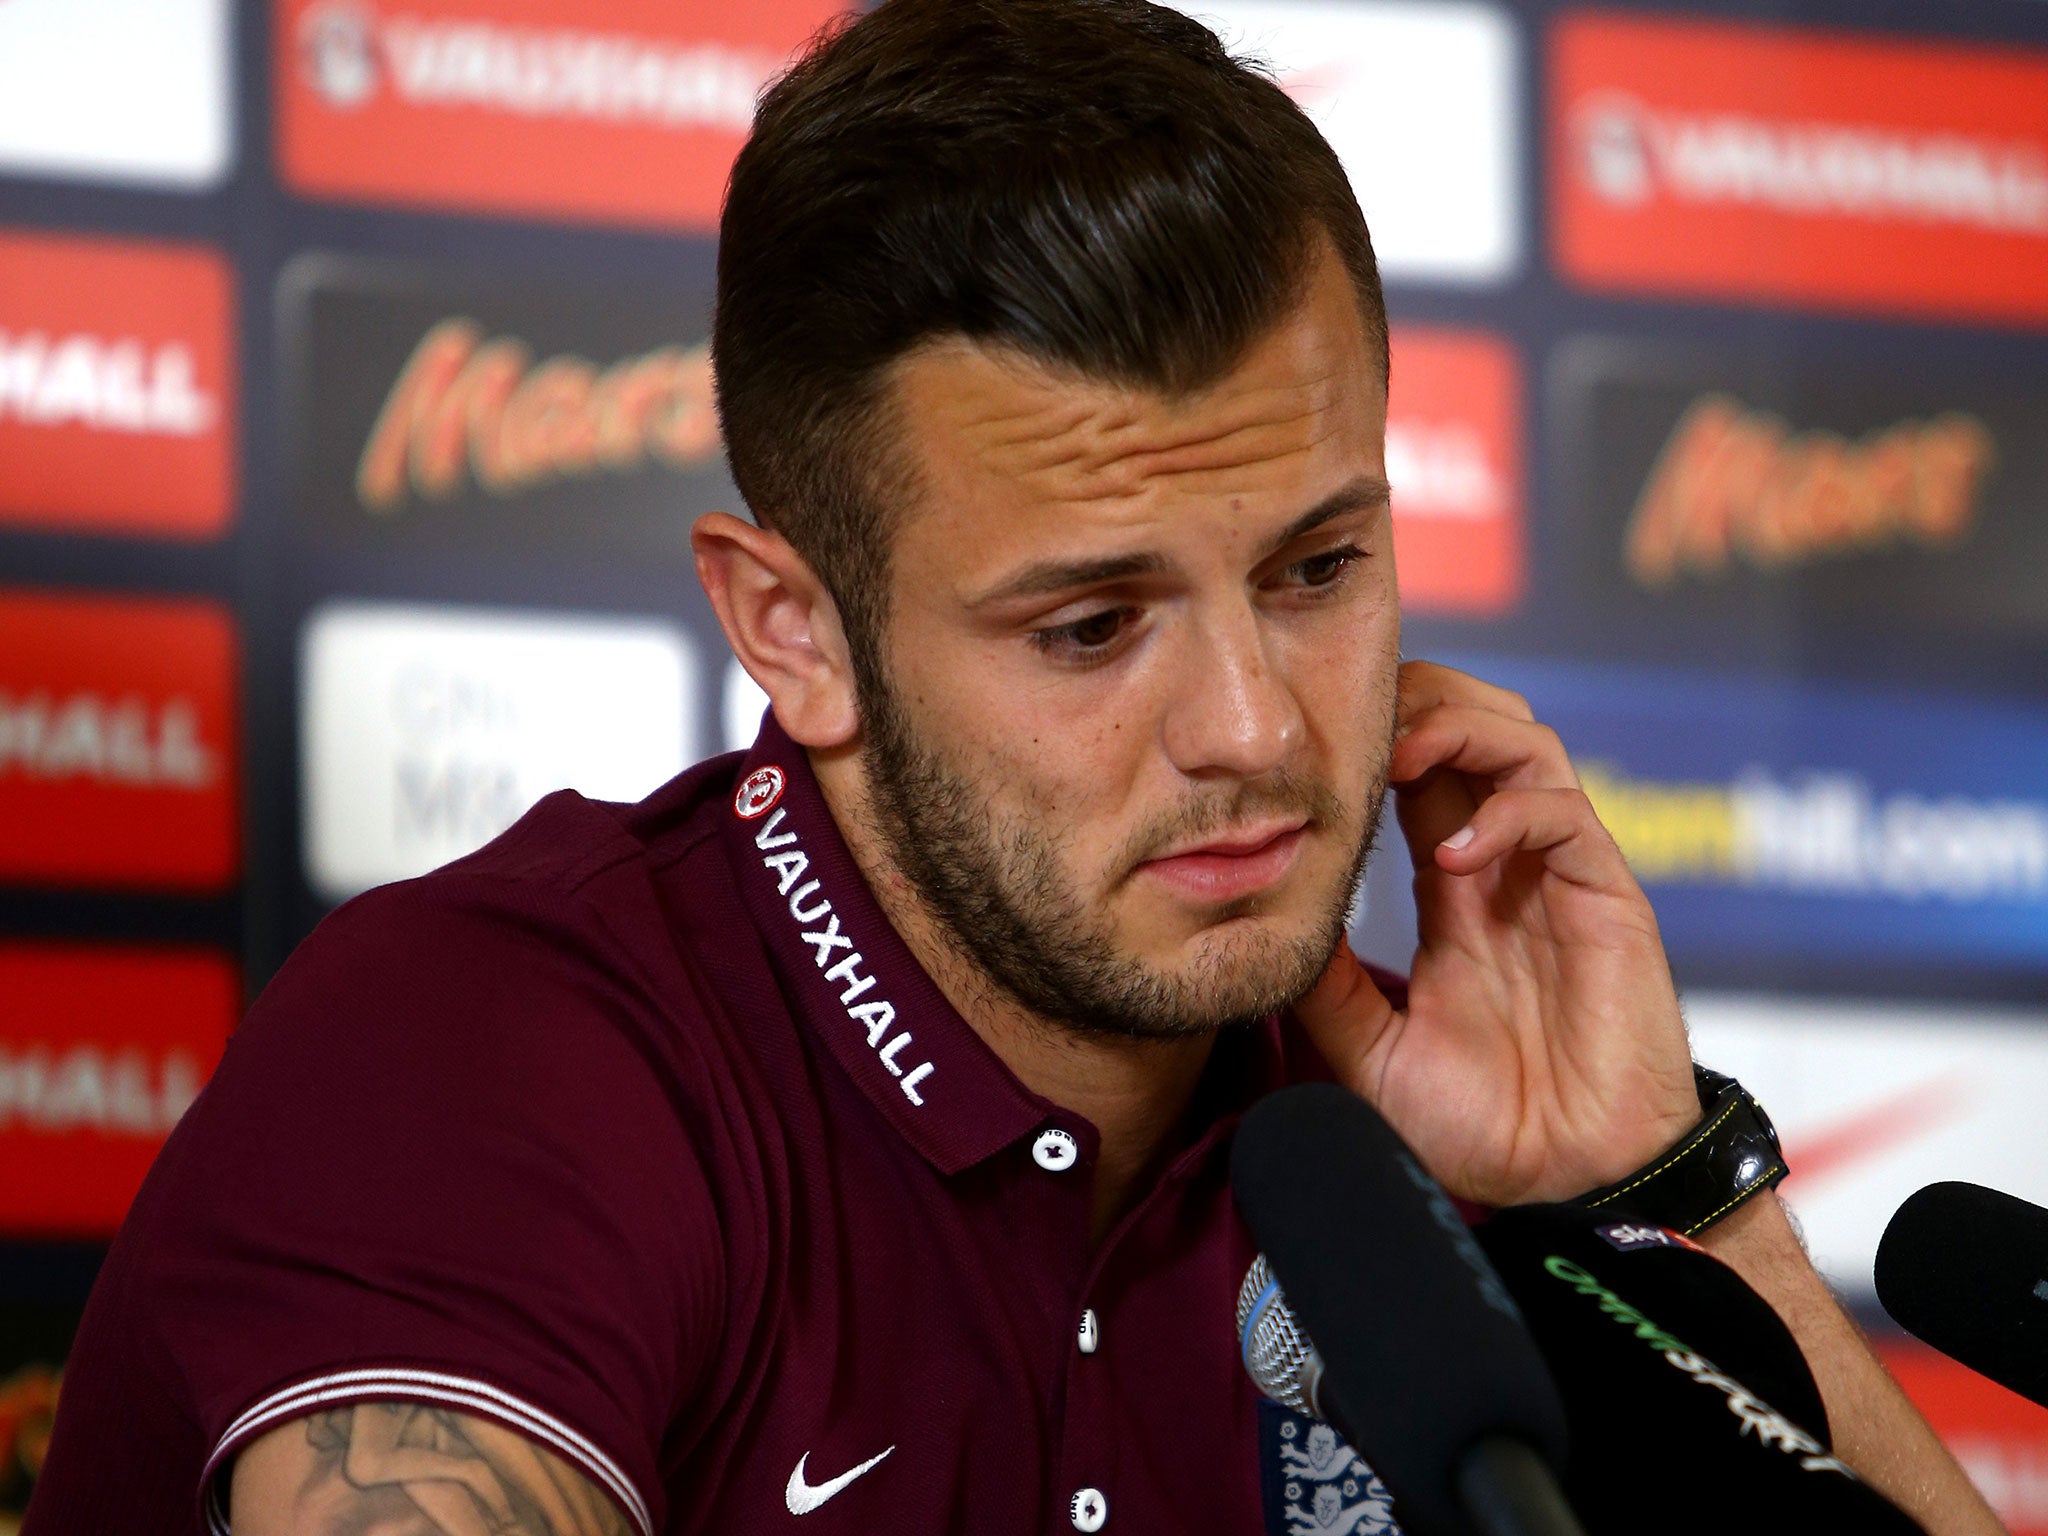 At 23, Jack Wilshere is central to Roy Hodgson's plans for England’s midfield